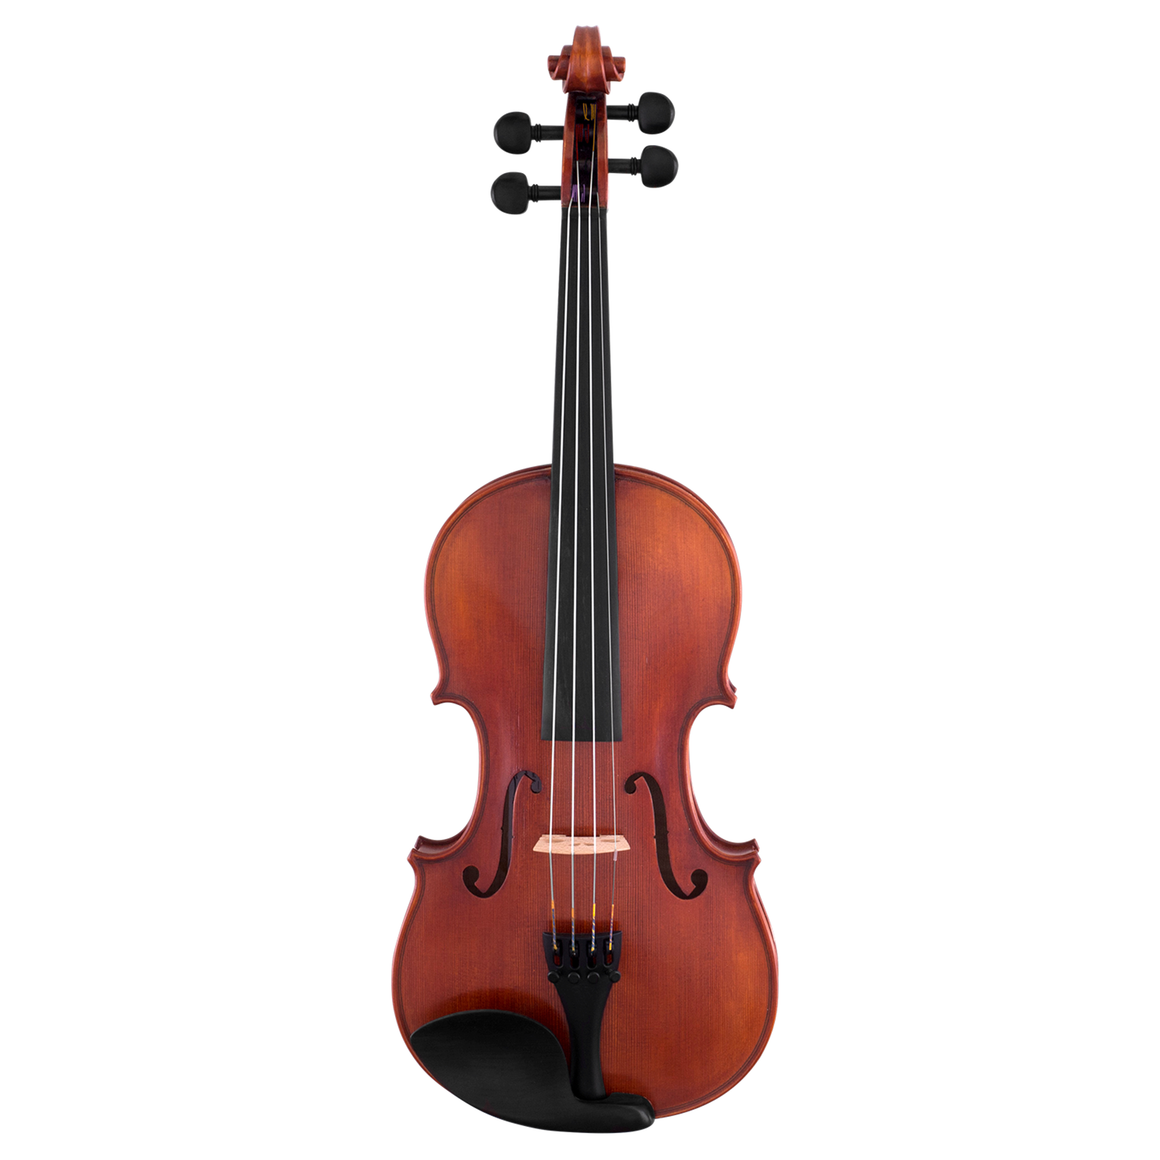 Sherl & Roth SR62E162H Step Up 16.5" Viola Outfit